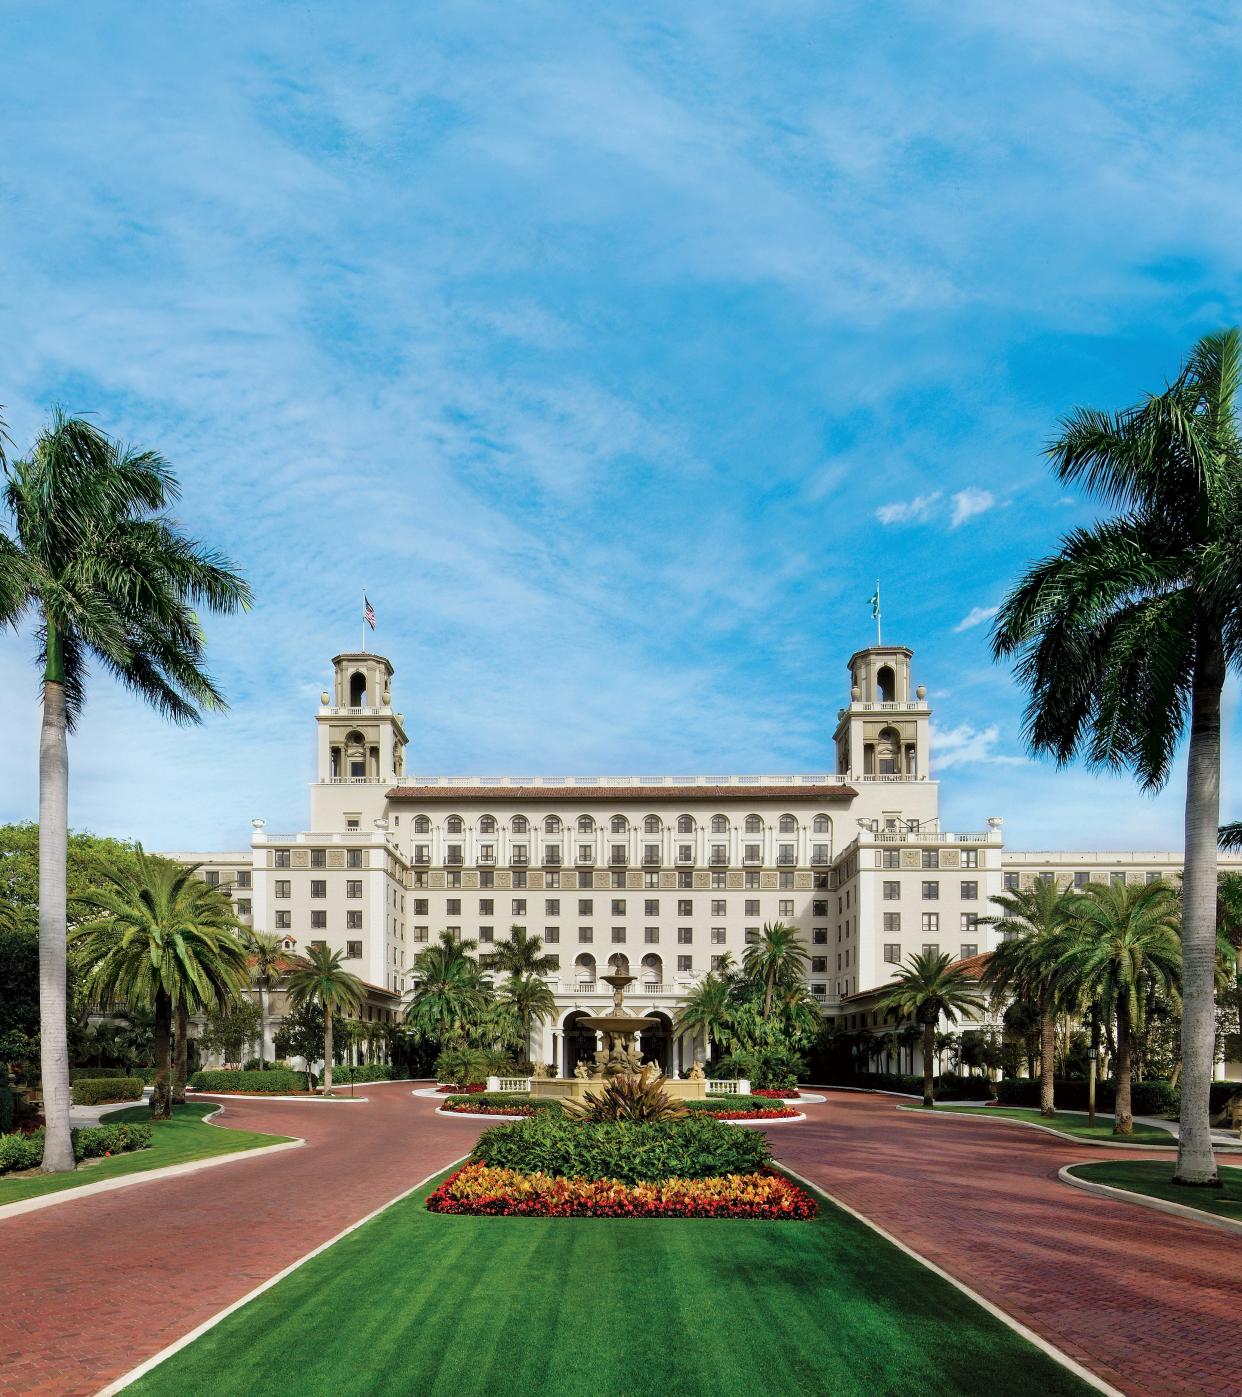 The Breakers is offering special rates for the summer as well as a bed-and-breakfast package.